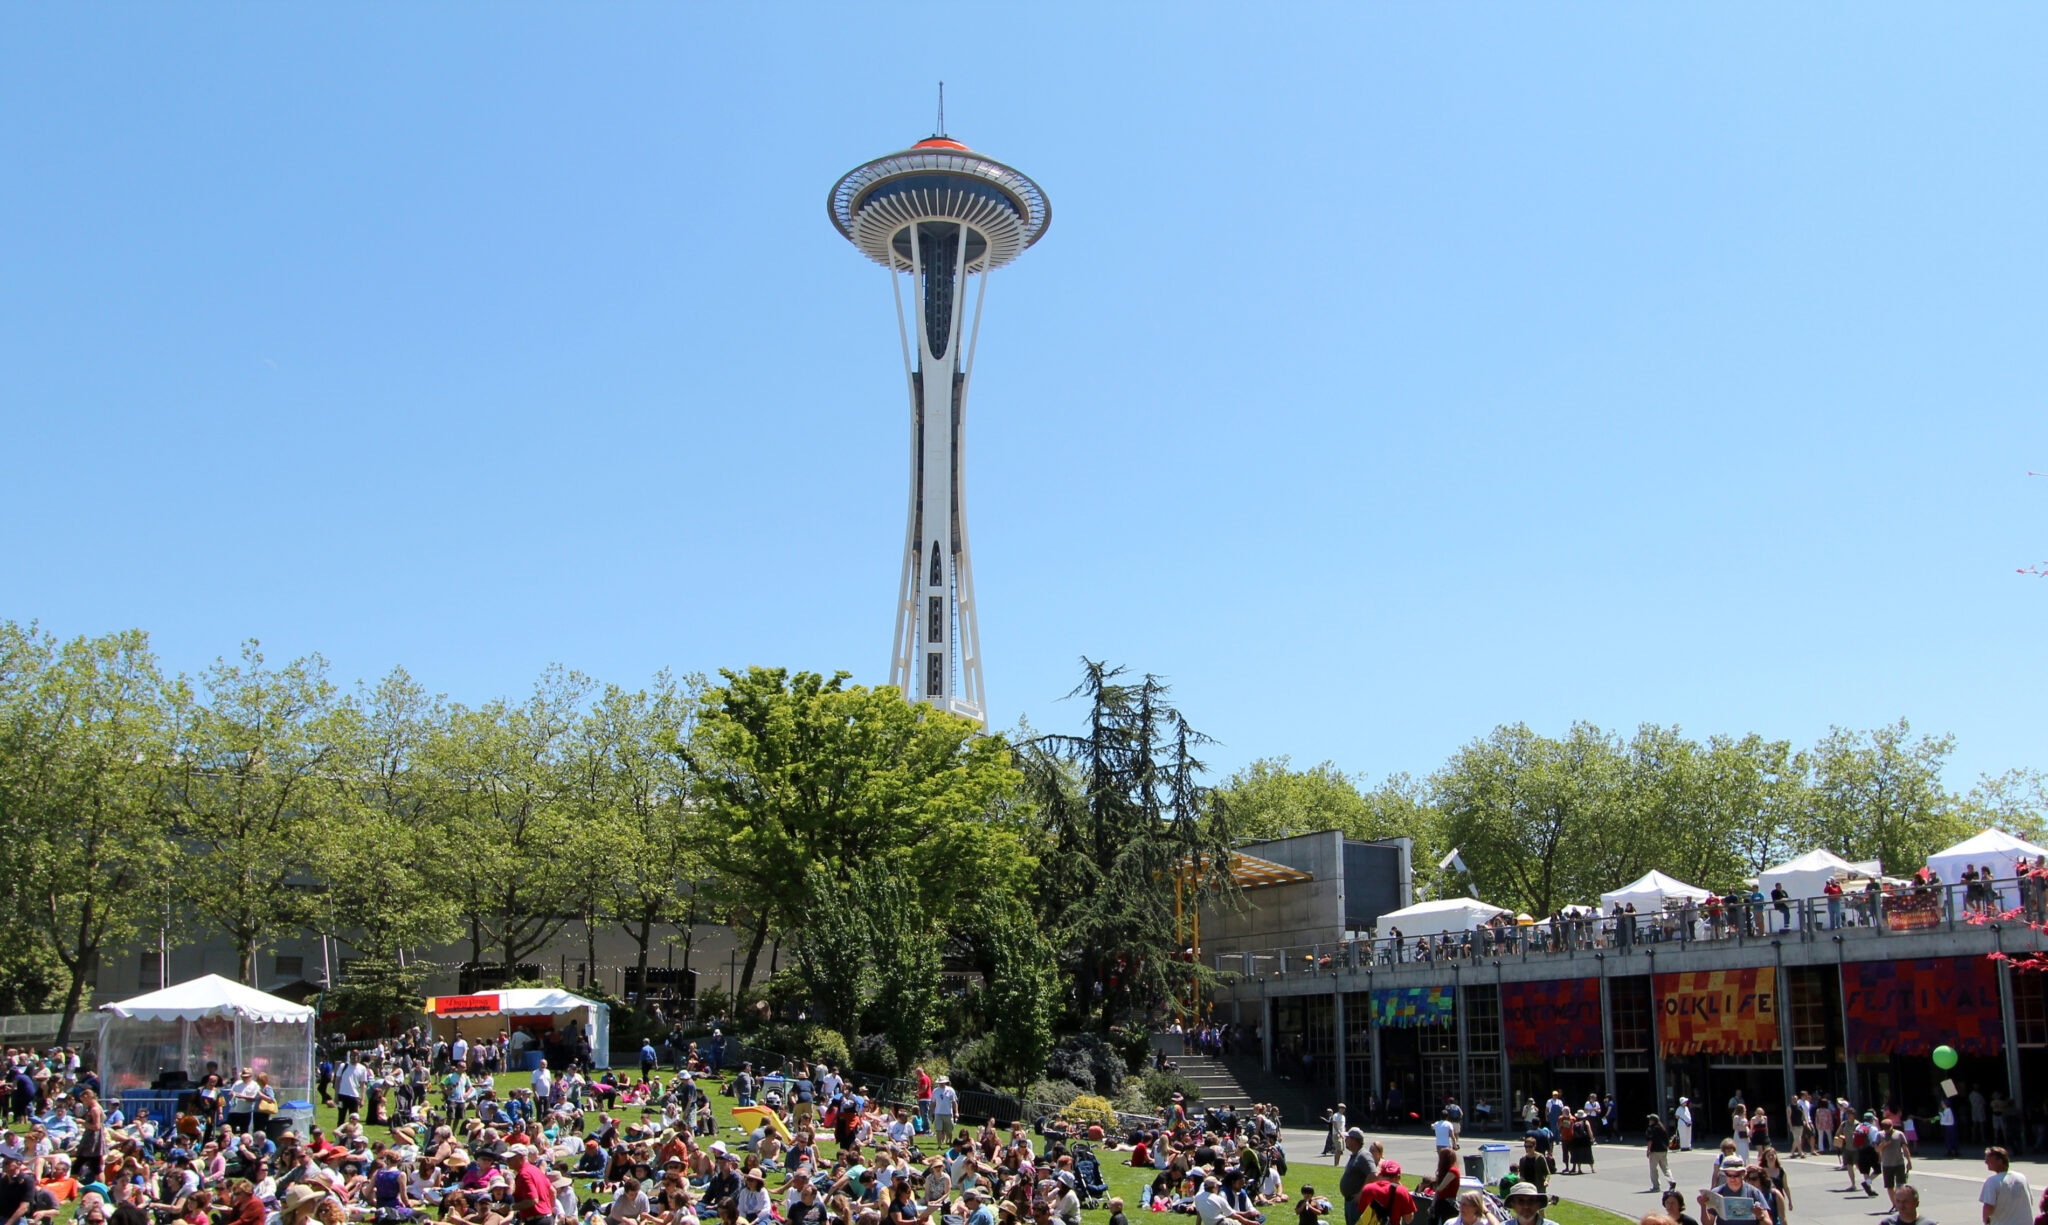 The Space Needle at Seattle's science center